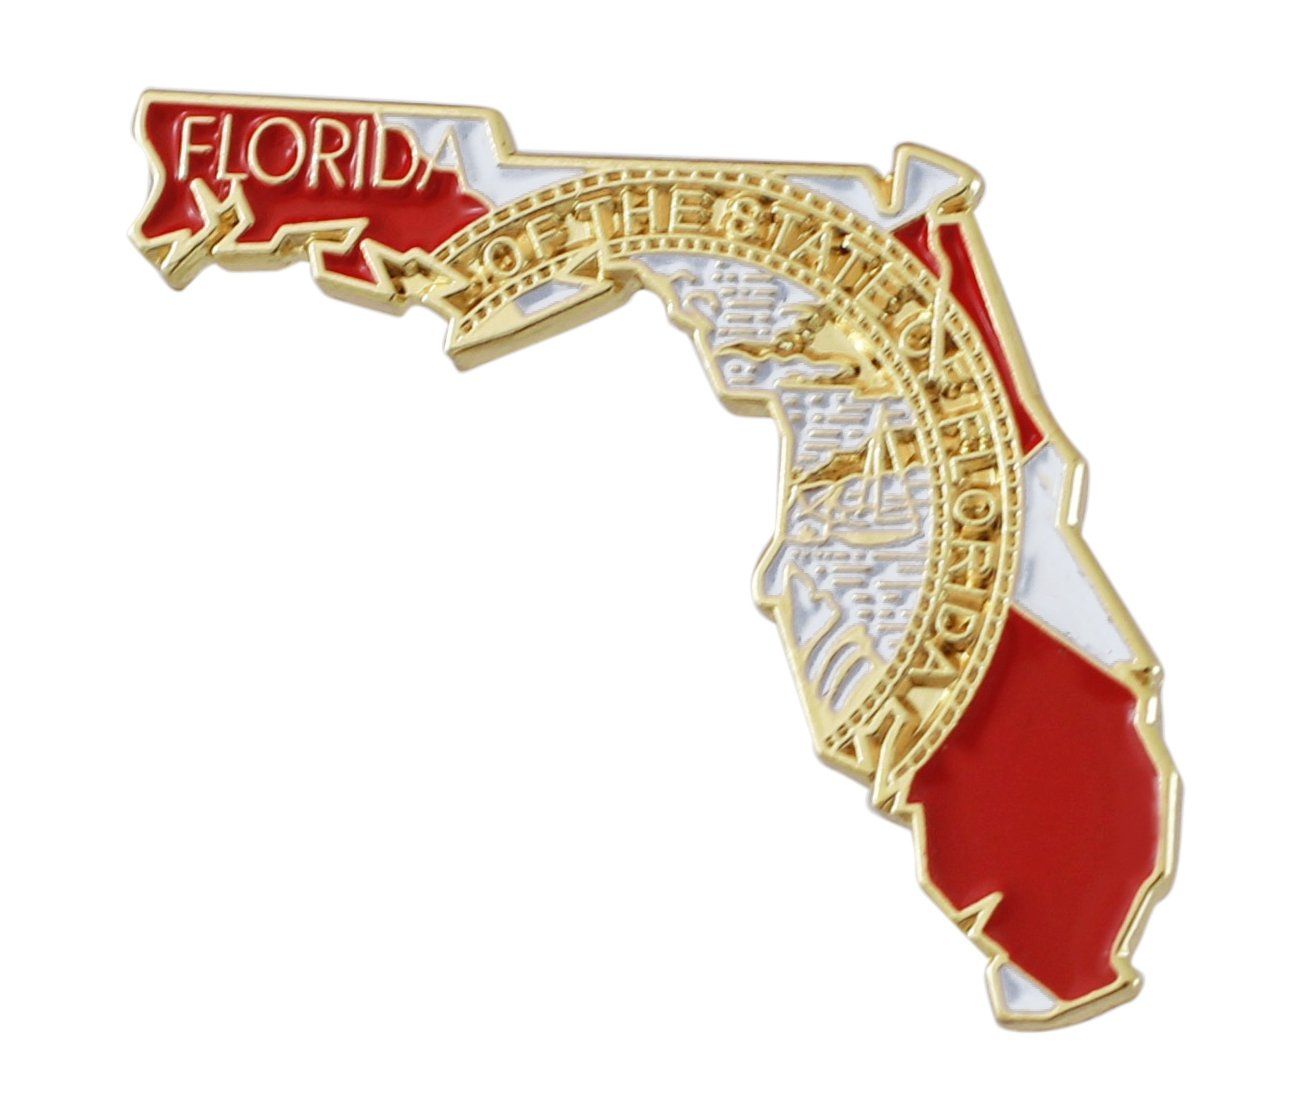 State Shape of Florida with Florida Flag Lapel Pin Pin WizardPins 50 Pins 